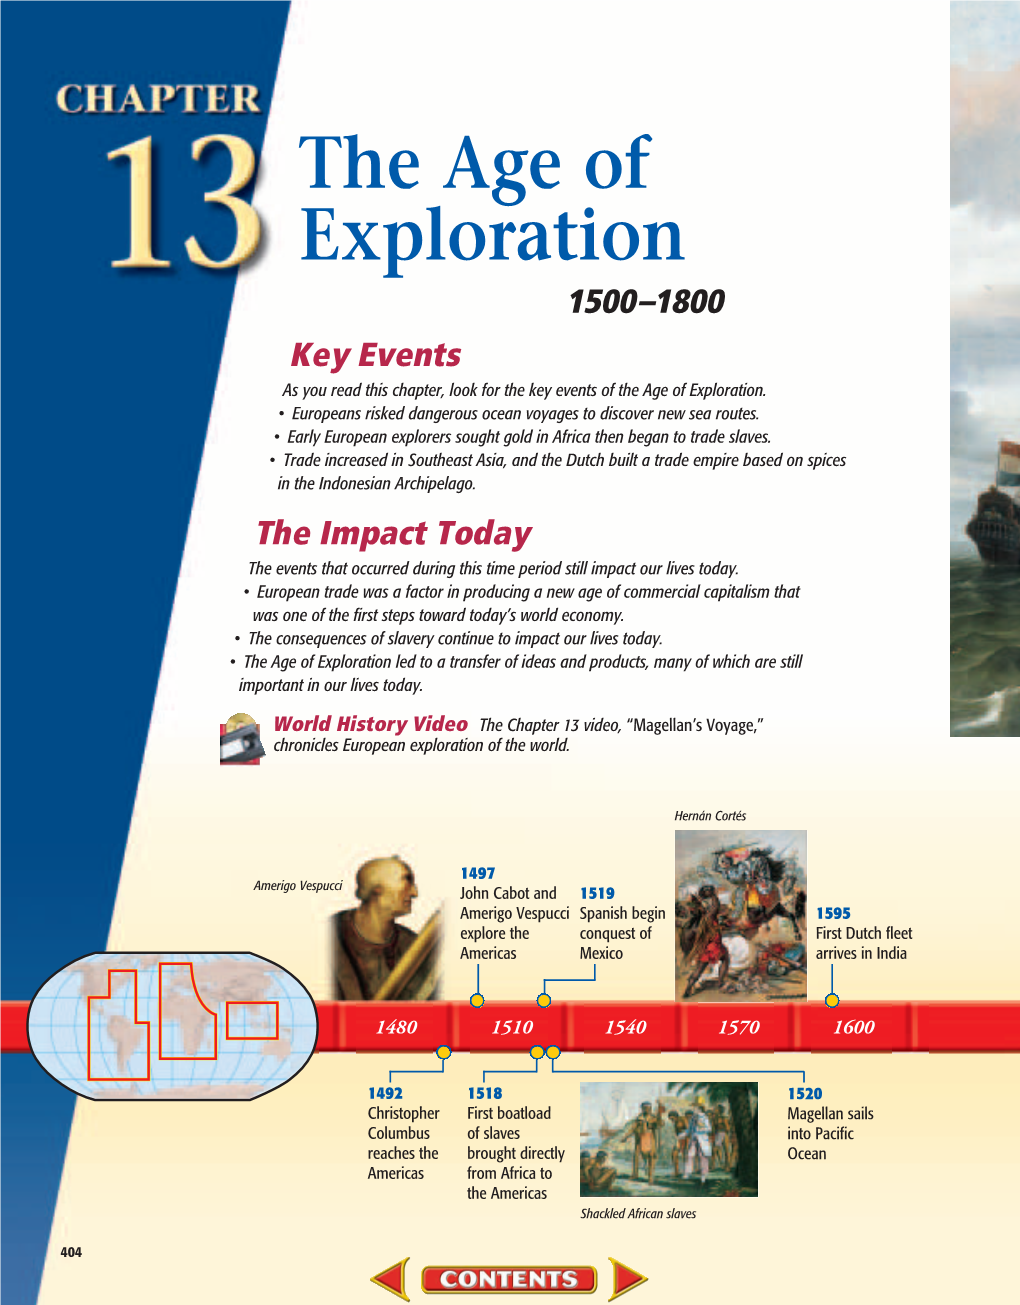 Chapter 13: the Age of Exploration, 1500-1800